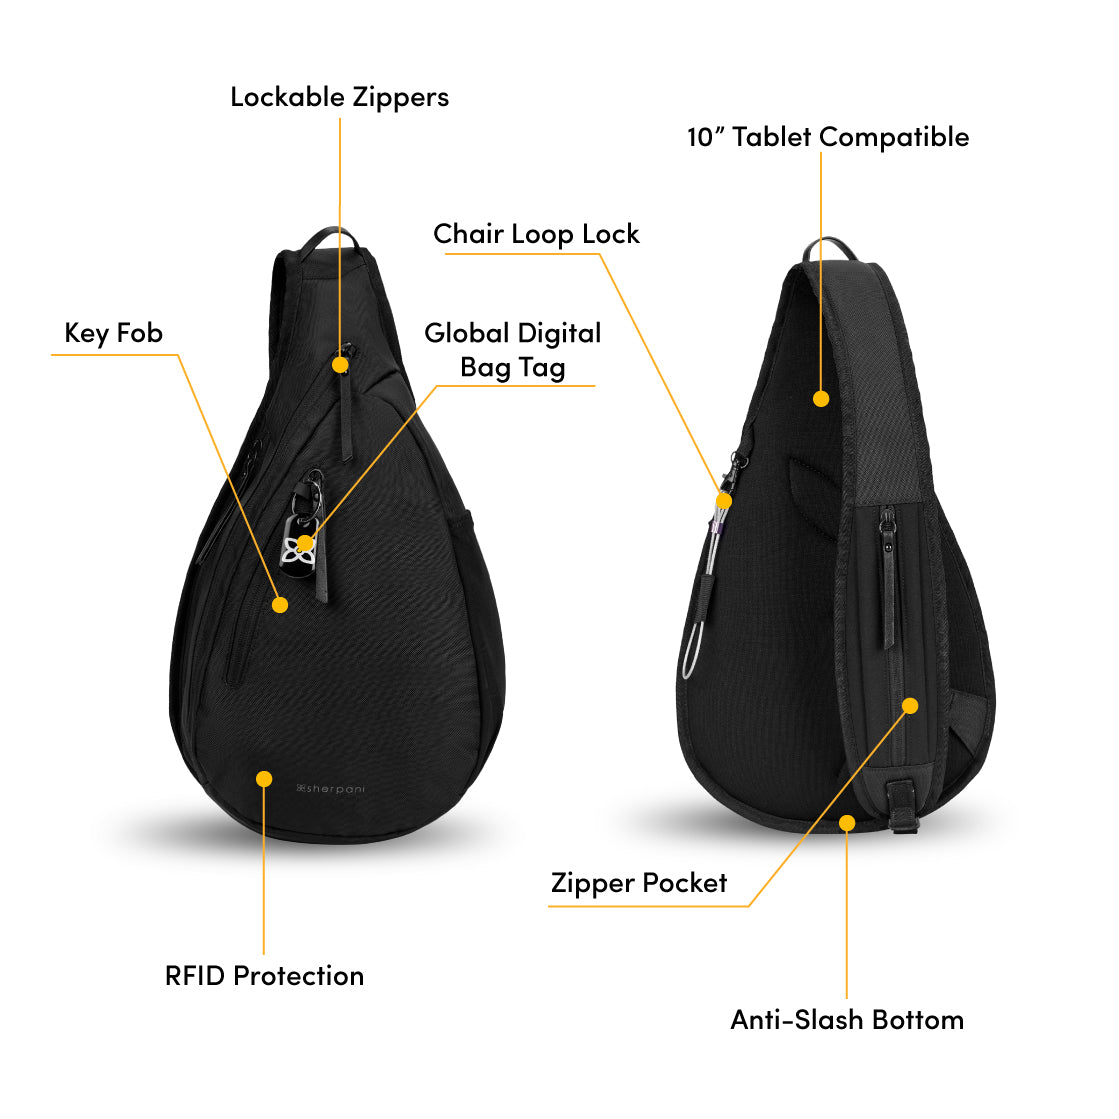 Graphic showcasing the features of Sherpani’s Anti Theft bag, the Esprit AT in Carbon. There is a front and a back view of the bag, red circles highlight the following features: Lockable Zippers, Key Fob, Chair Loop Lock, 10” Tablet Compatible, Zipper Pocket, Anti-Slash Bottom, RFID Protection.